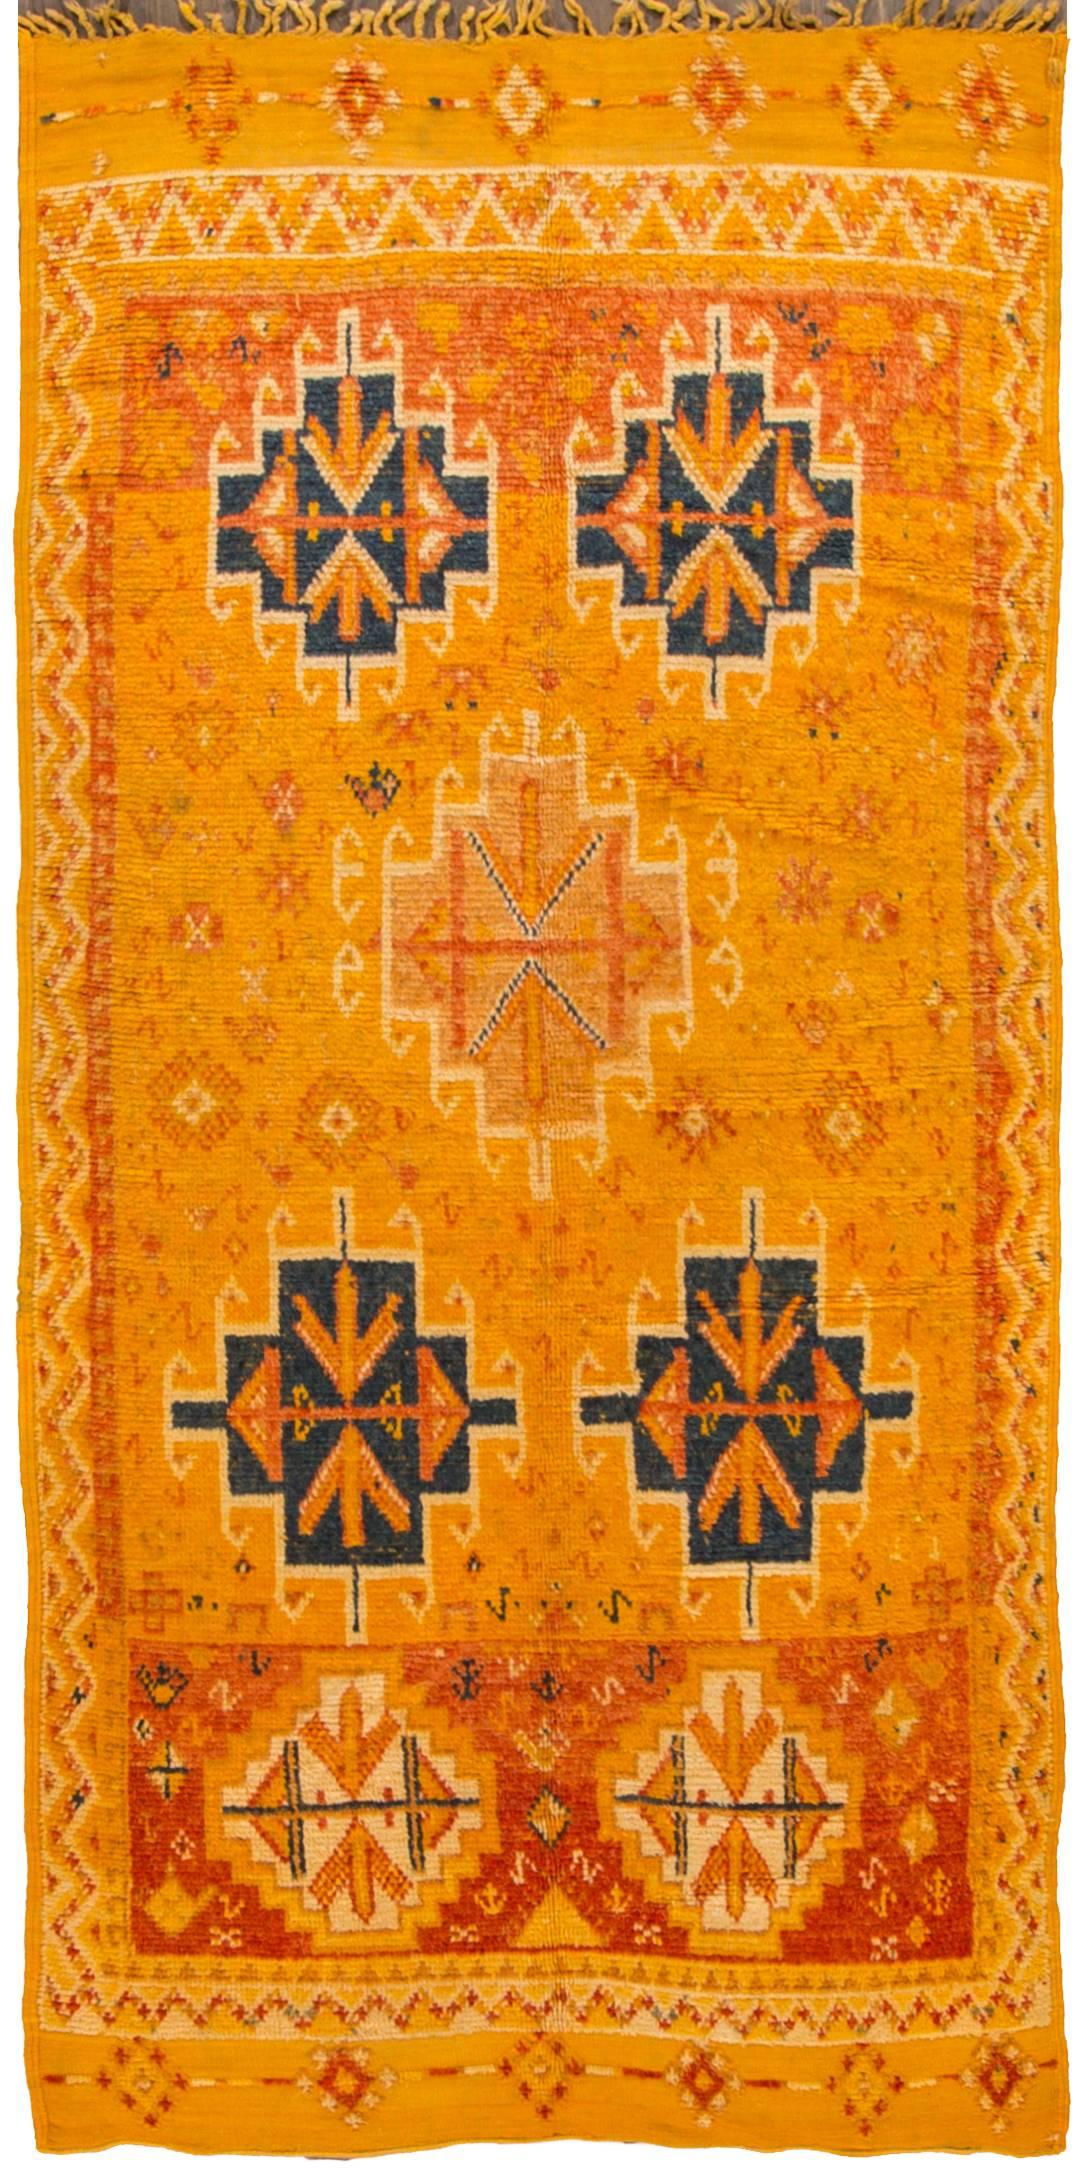 A hand-knotted vintage 1950s Moroccan rug with a geometric design on a yellow and orange field. Accents of red and dark blue throughout the piece. This rug measures 4.04x9